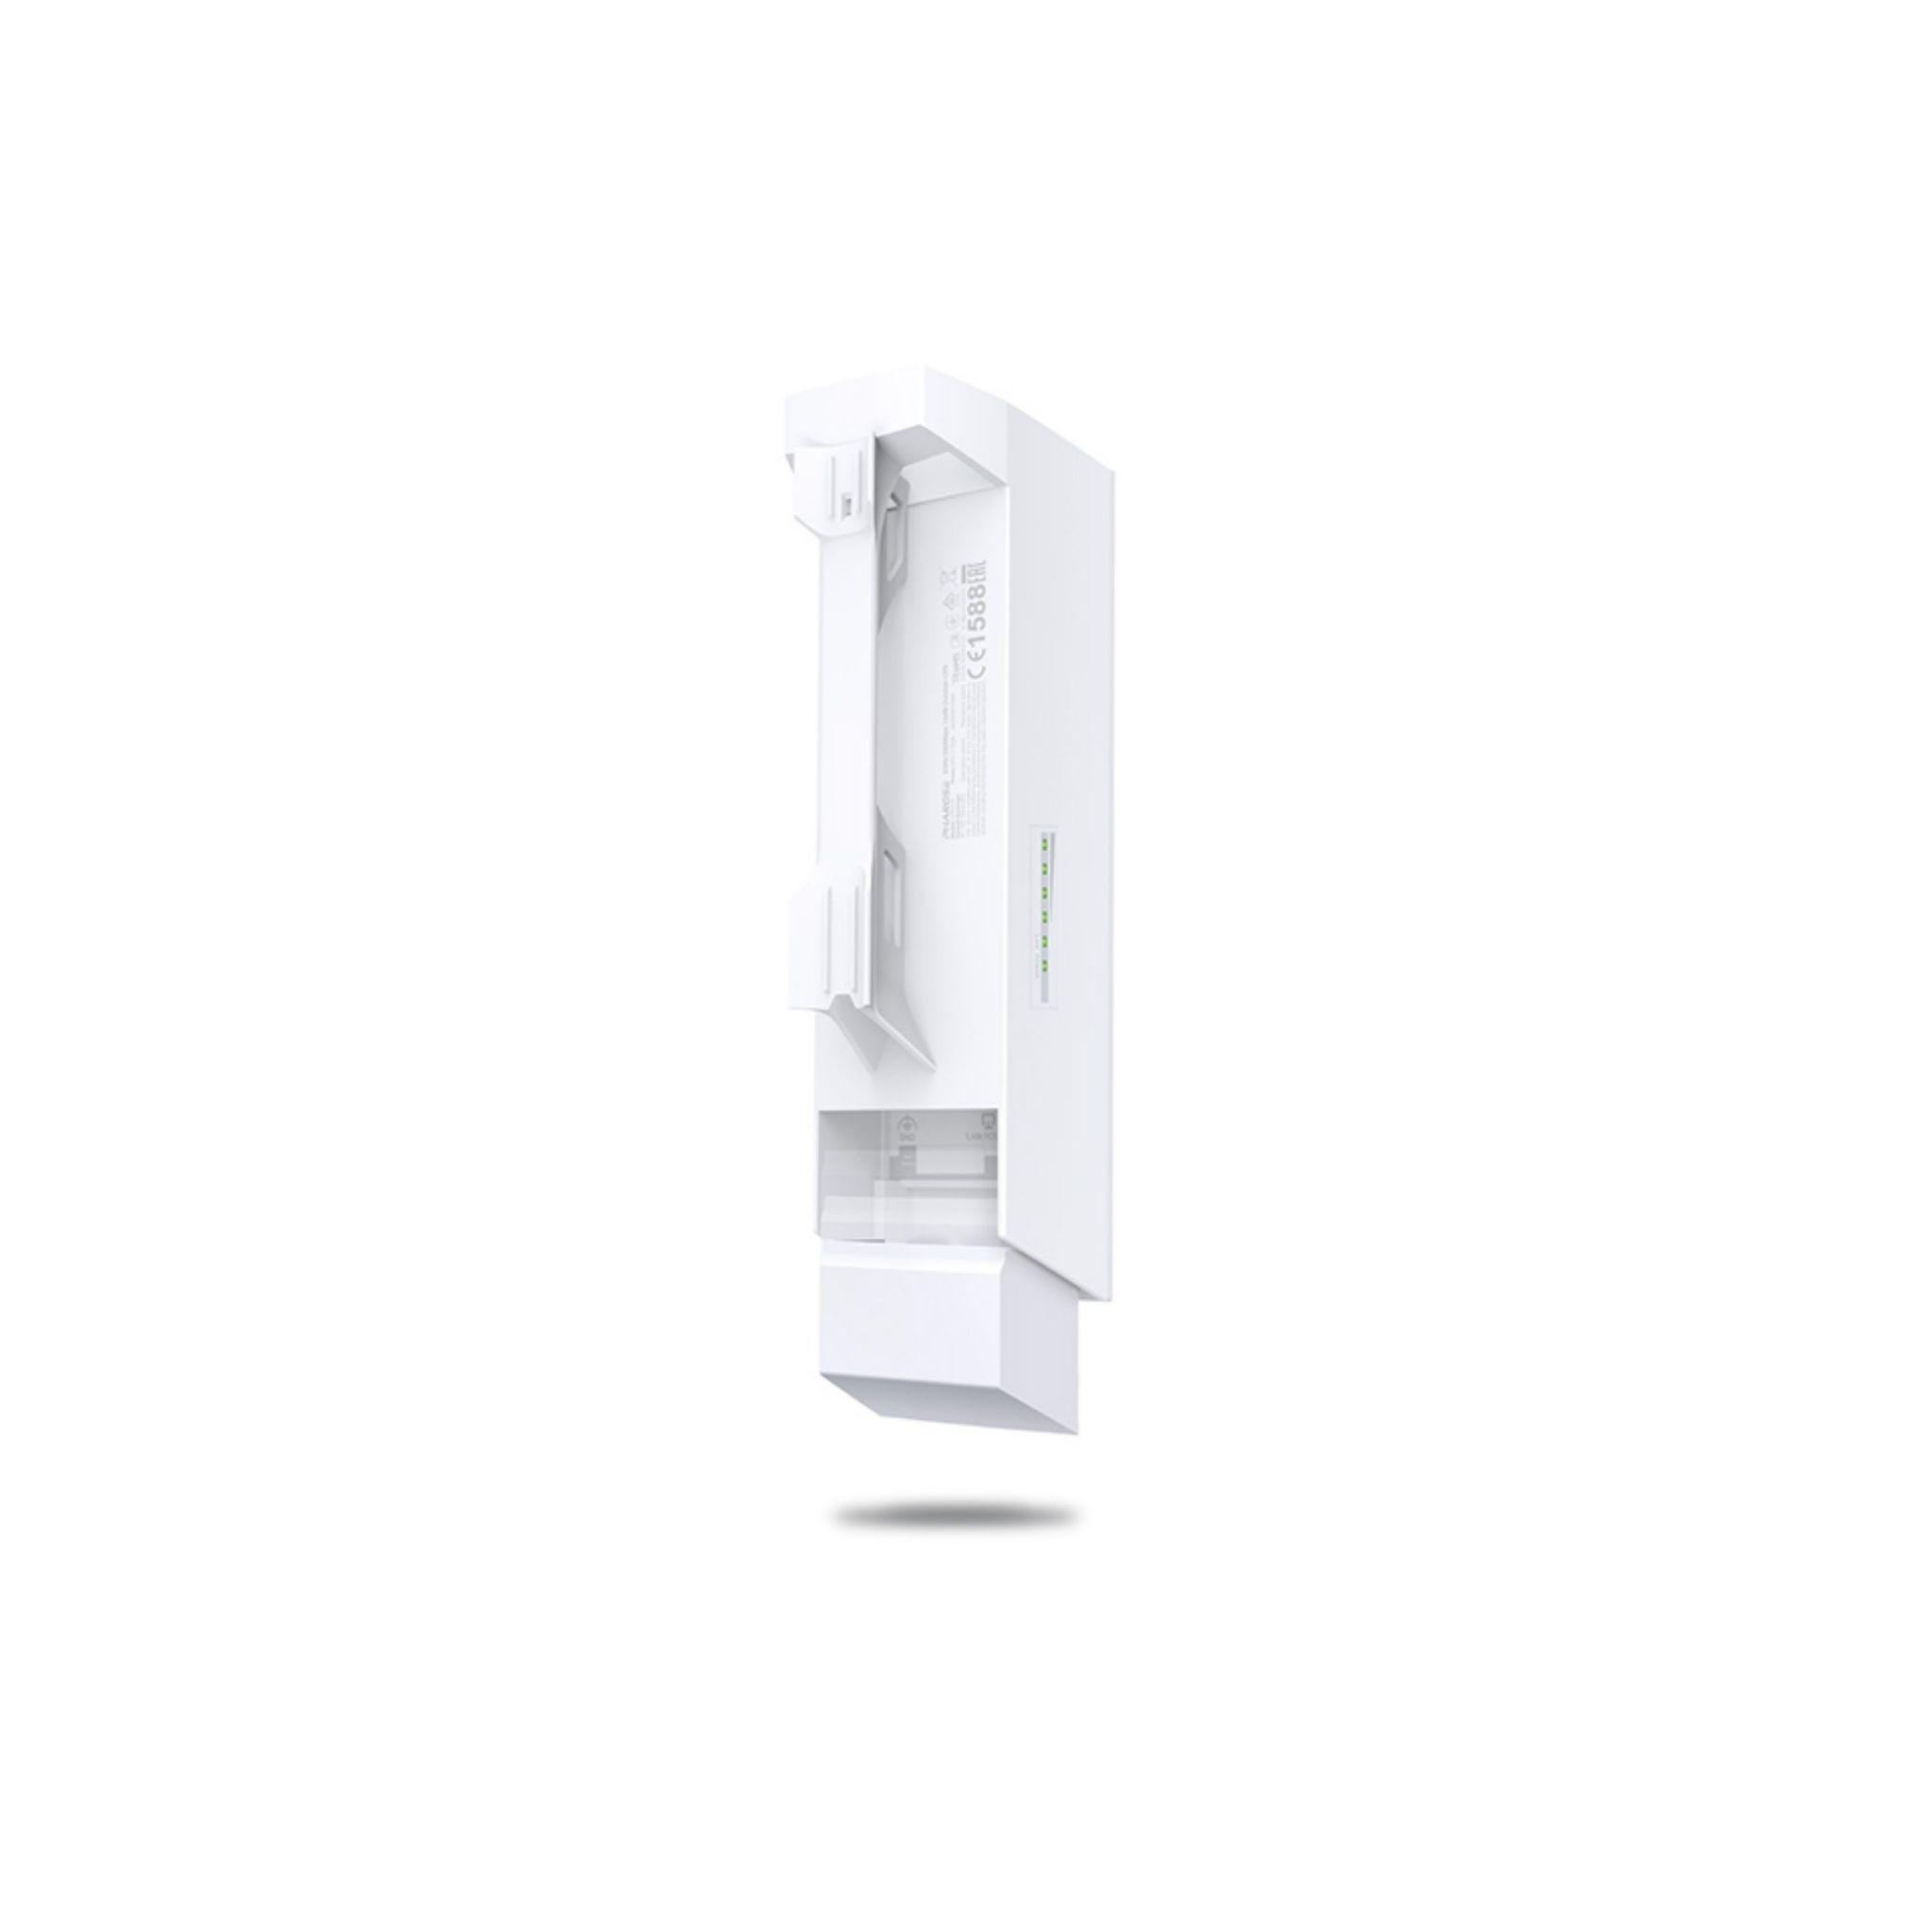 Outdoor Access Mbit/s 300 Access WLAN Wireless CPE510 TP-LINK Point Point